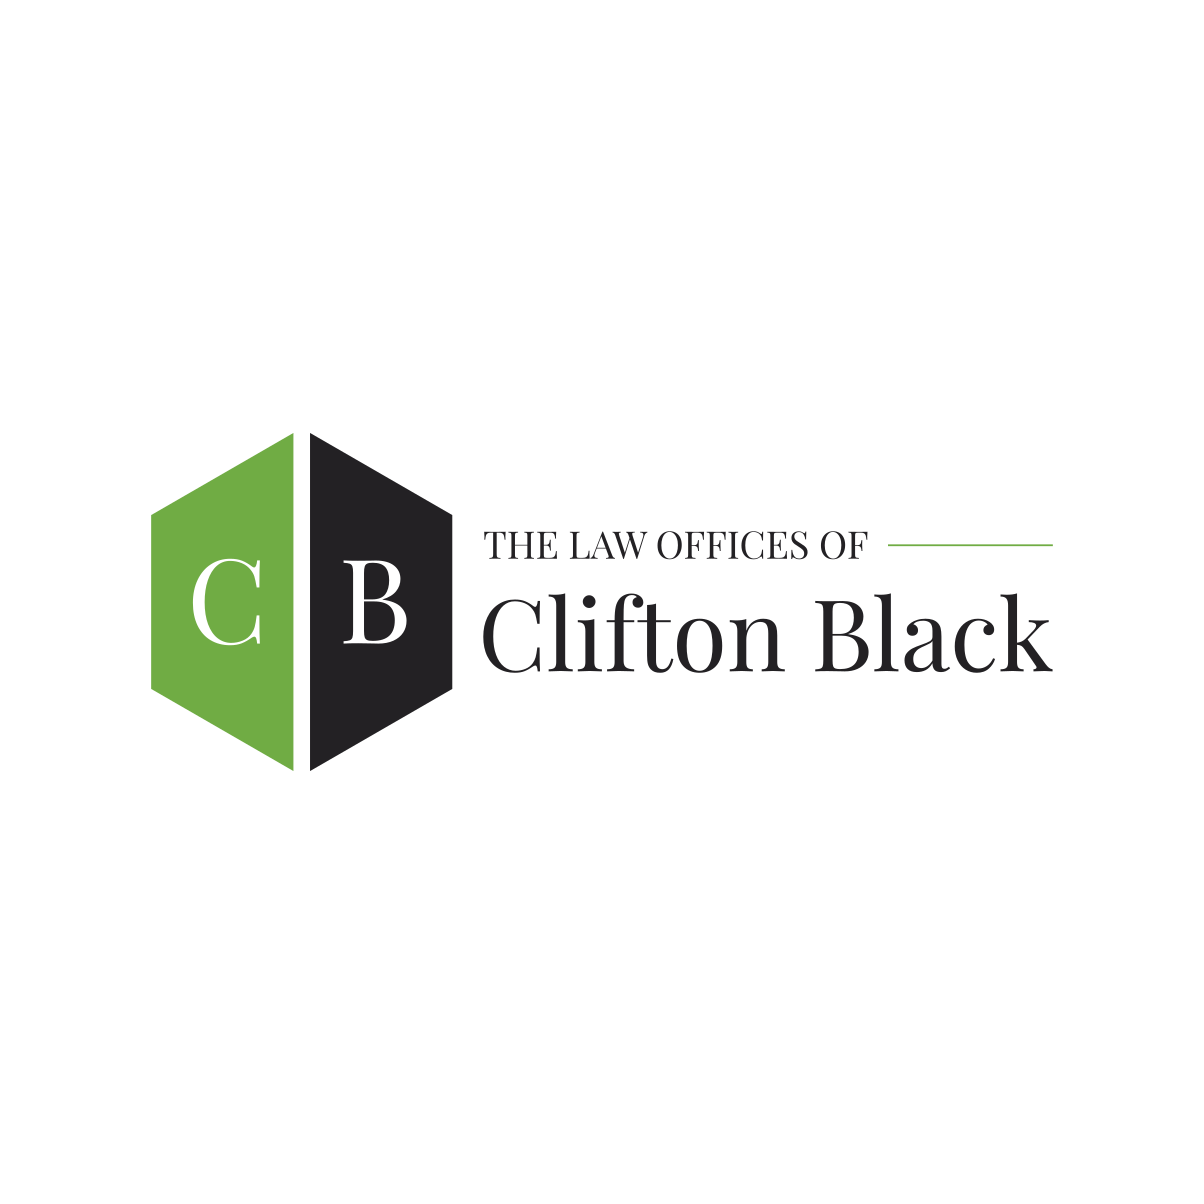 Law Offices of Clifton Black, PC - Colorado Springs, CO 80903 - (719)328-1616 | ShowMeLocal.com